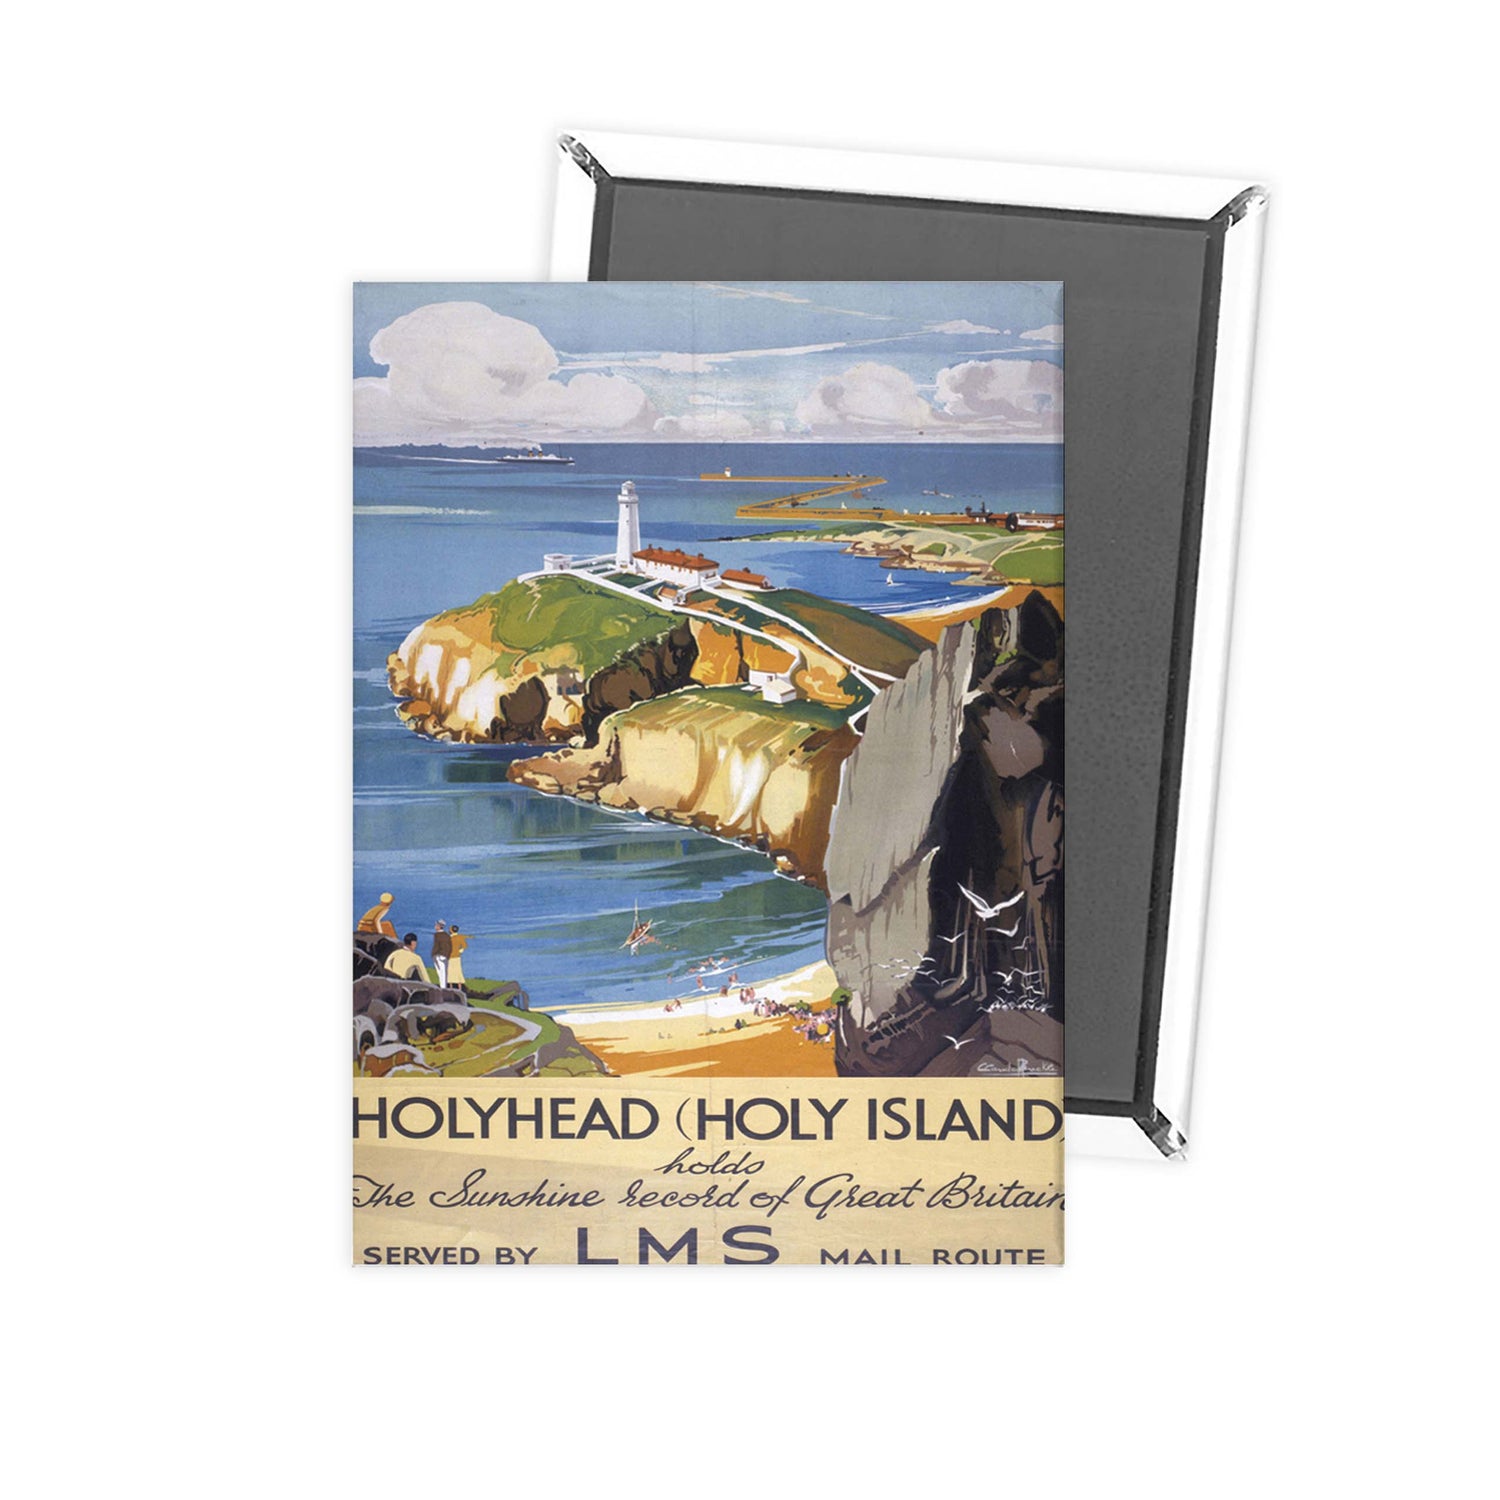 HolyHead record of great britain - Holy Island LMS poster Fridge Magnet